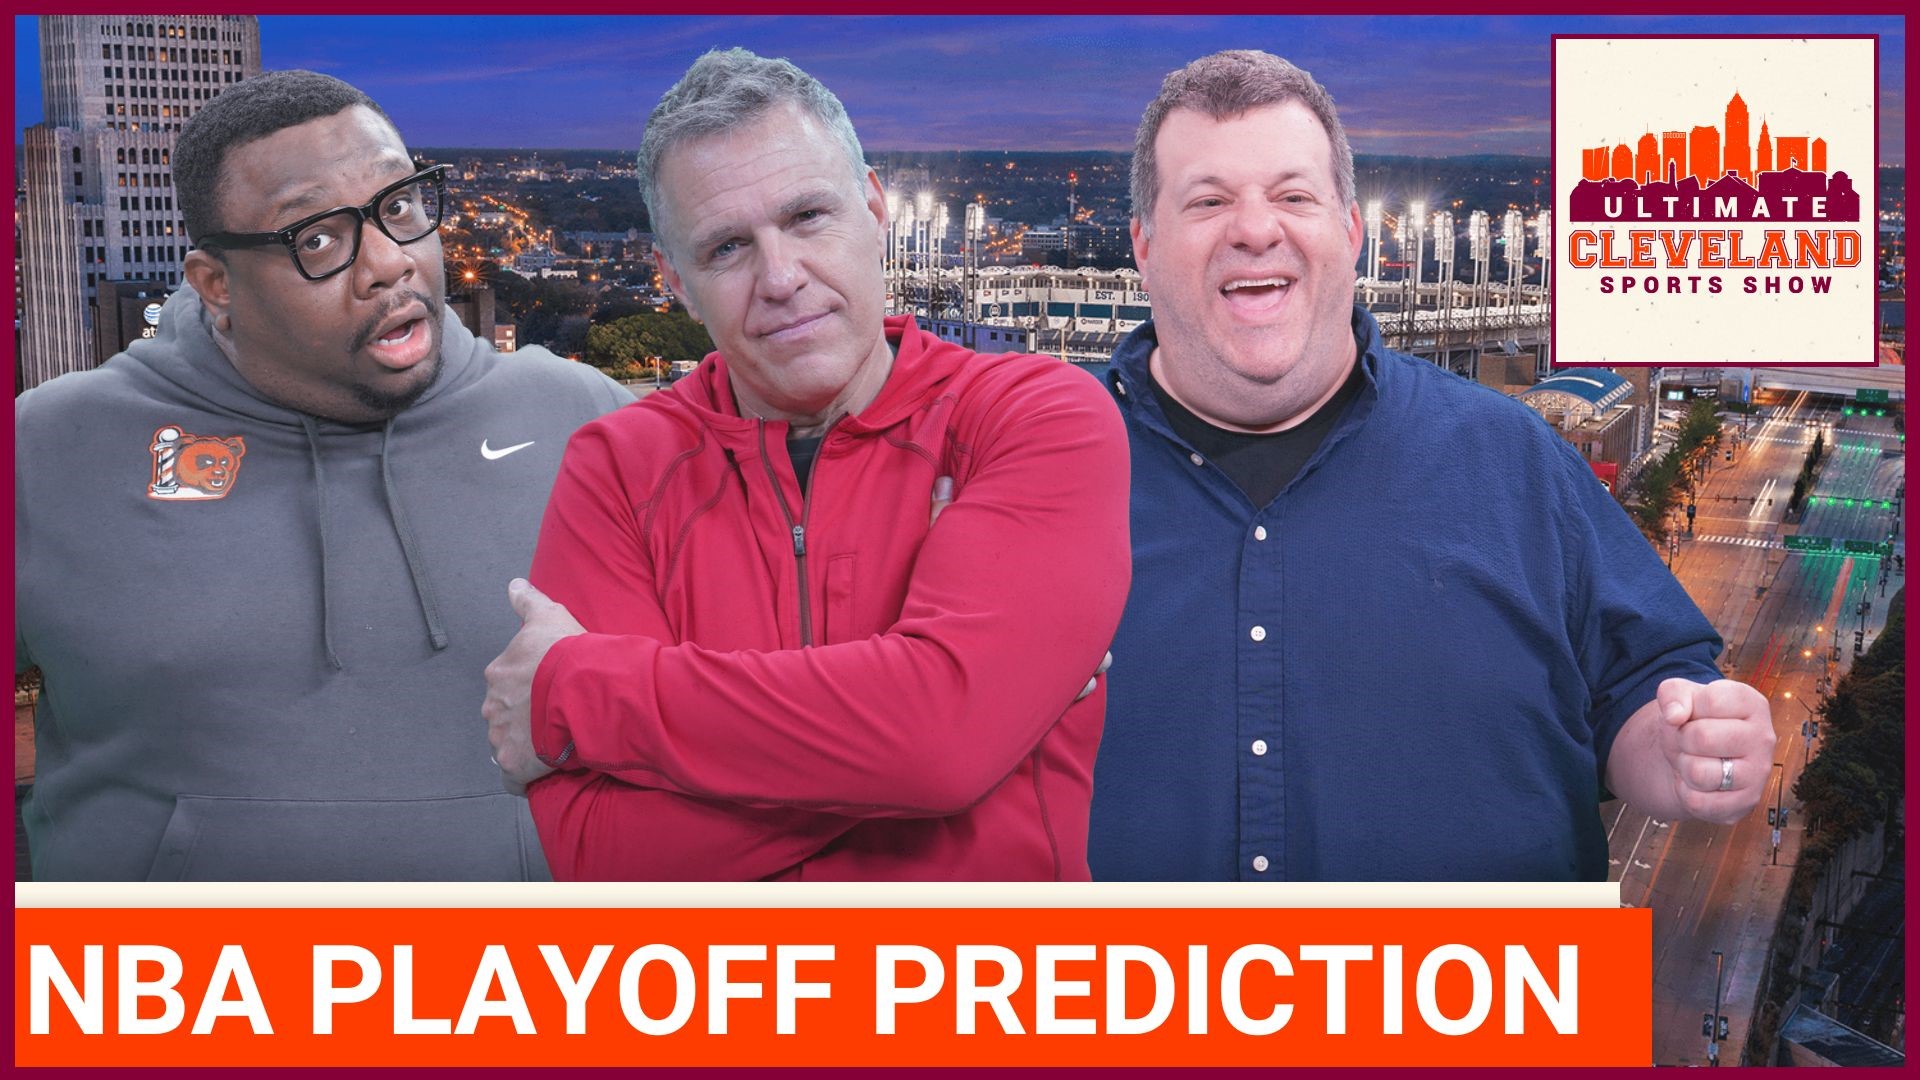 UCSS gives their NBA playoff predictions